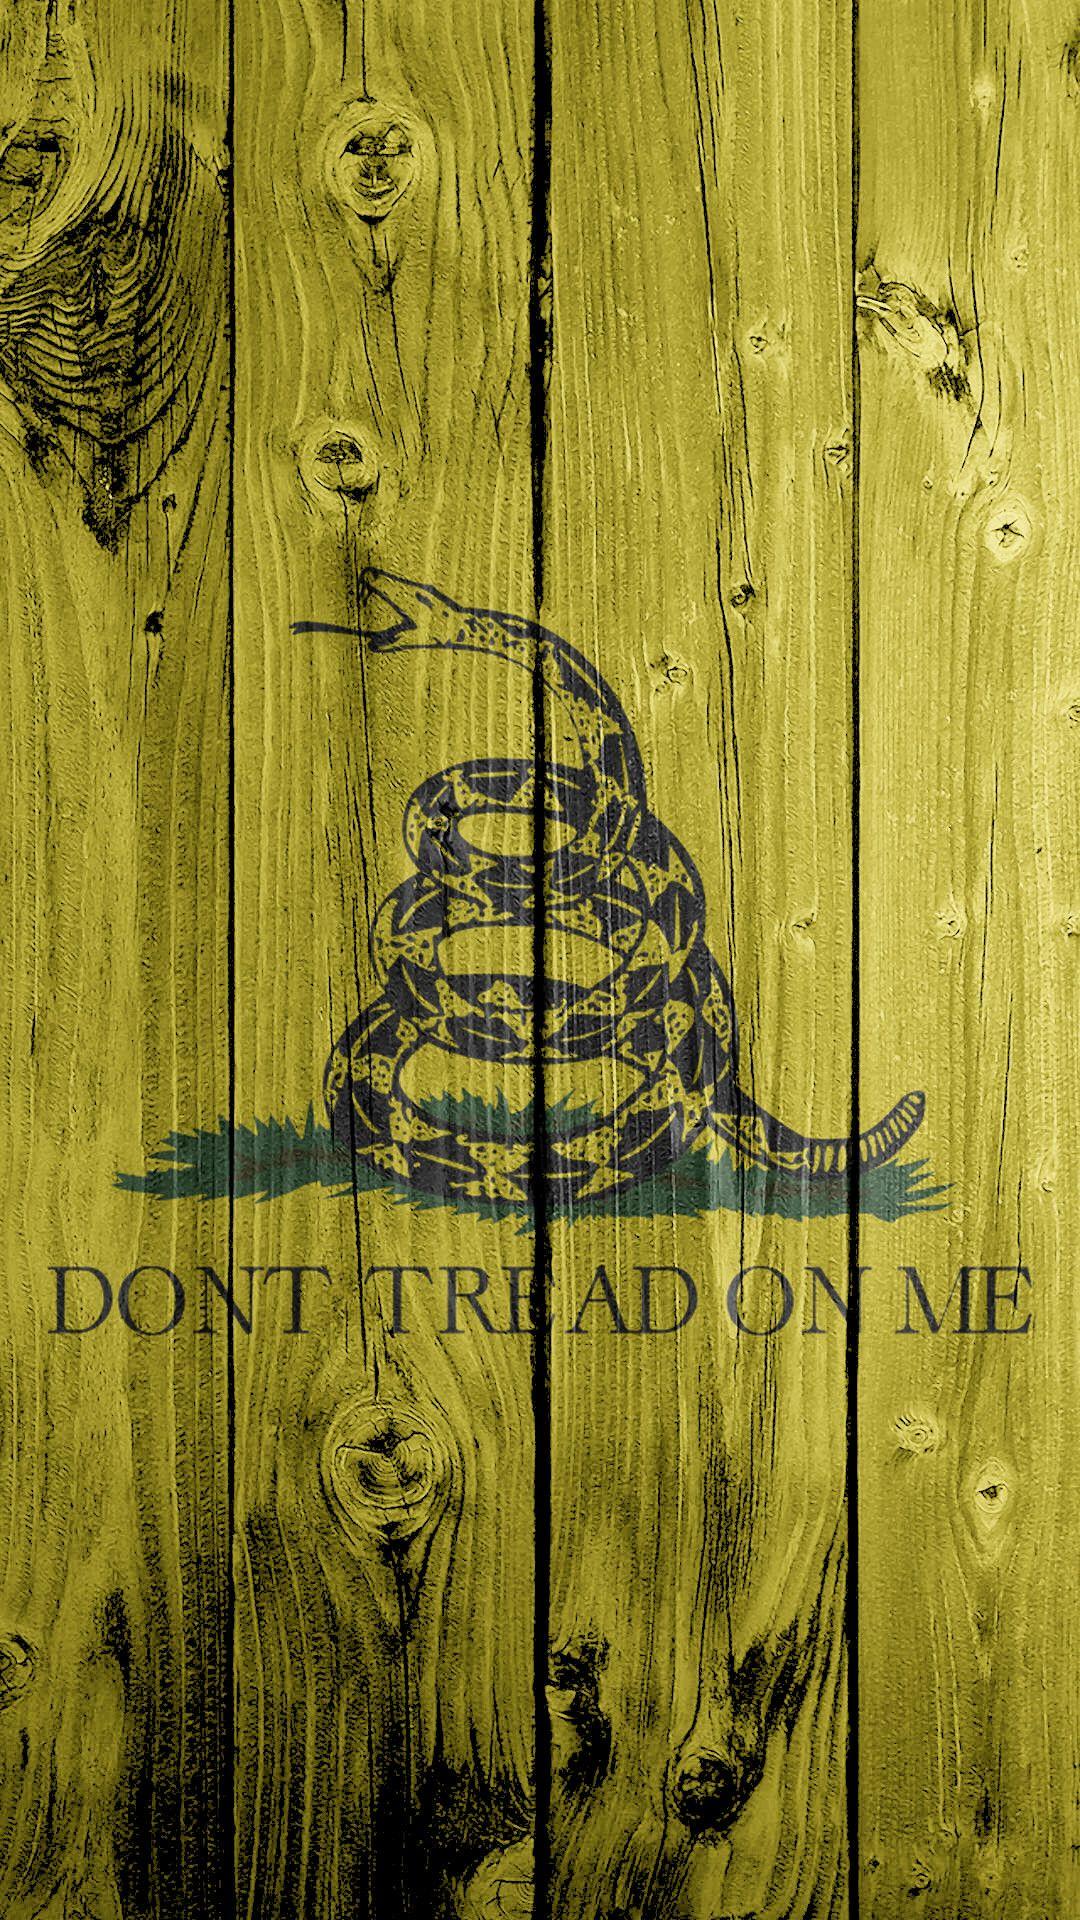 Gadsden Flag / Our right to bear arms / Freedom